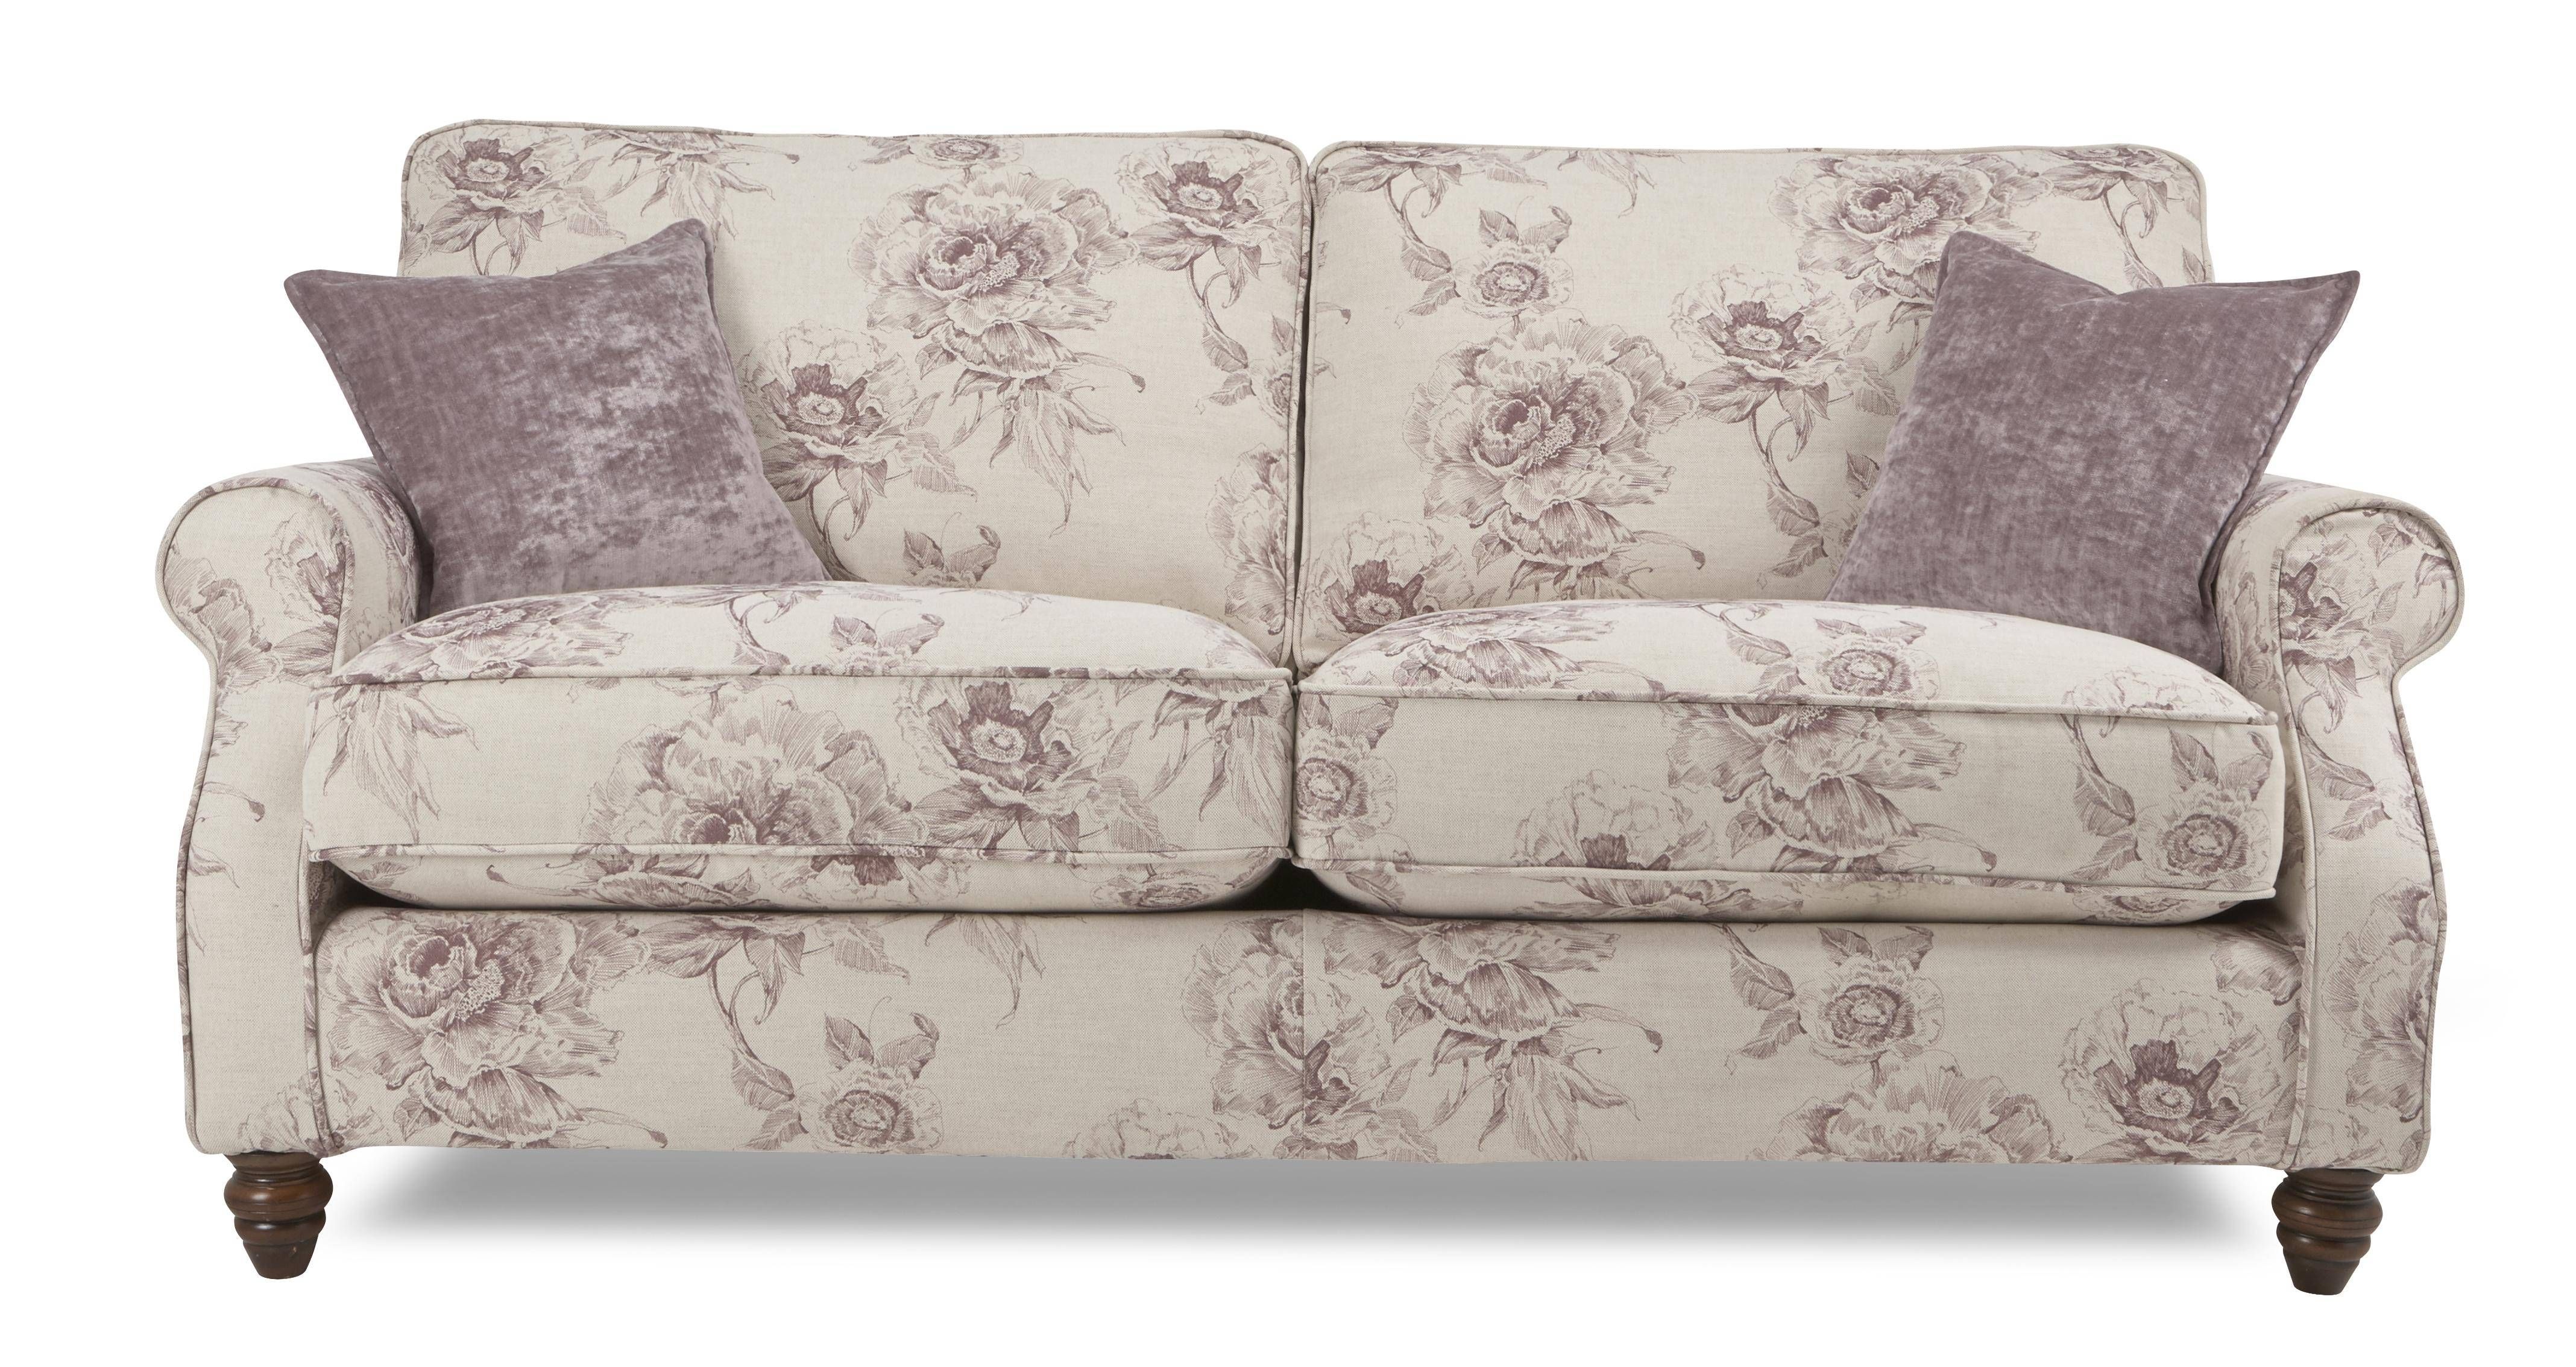 Best Floral Sofas With Chiltern Vintage Floral Large Sofa Chiltern With Regard To Floral Sofas (View 11 of 15)